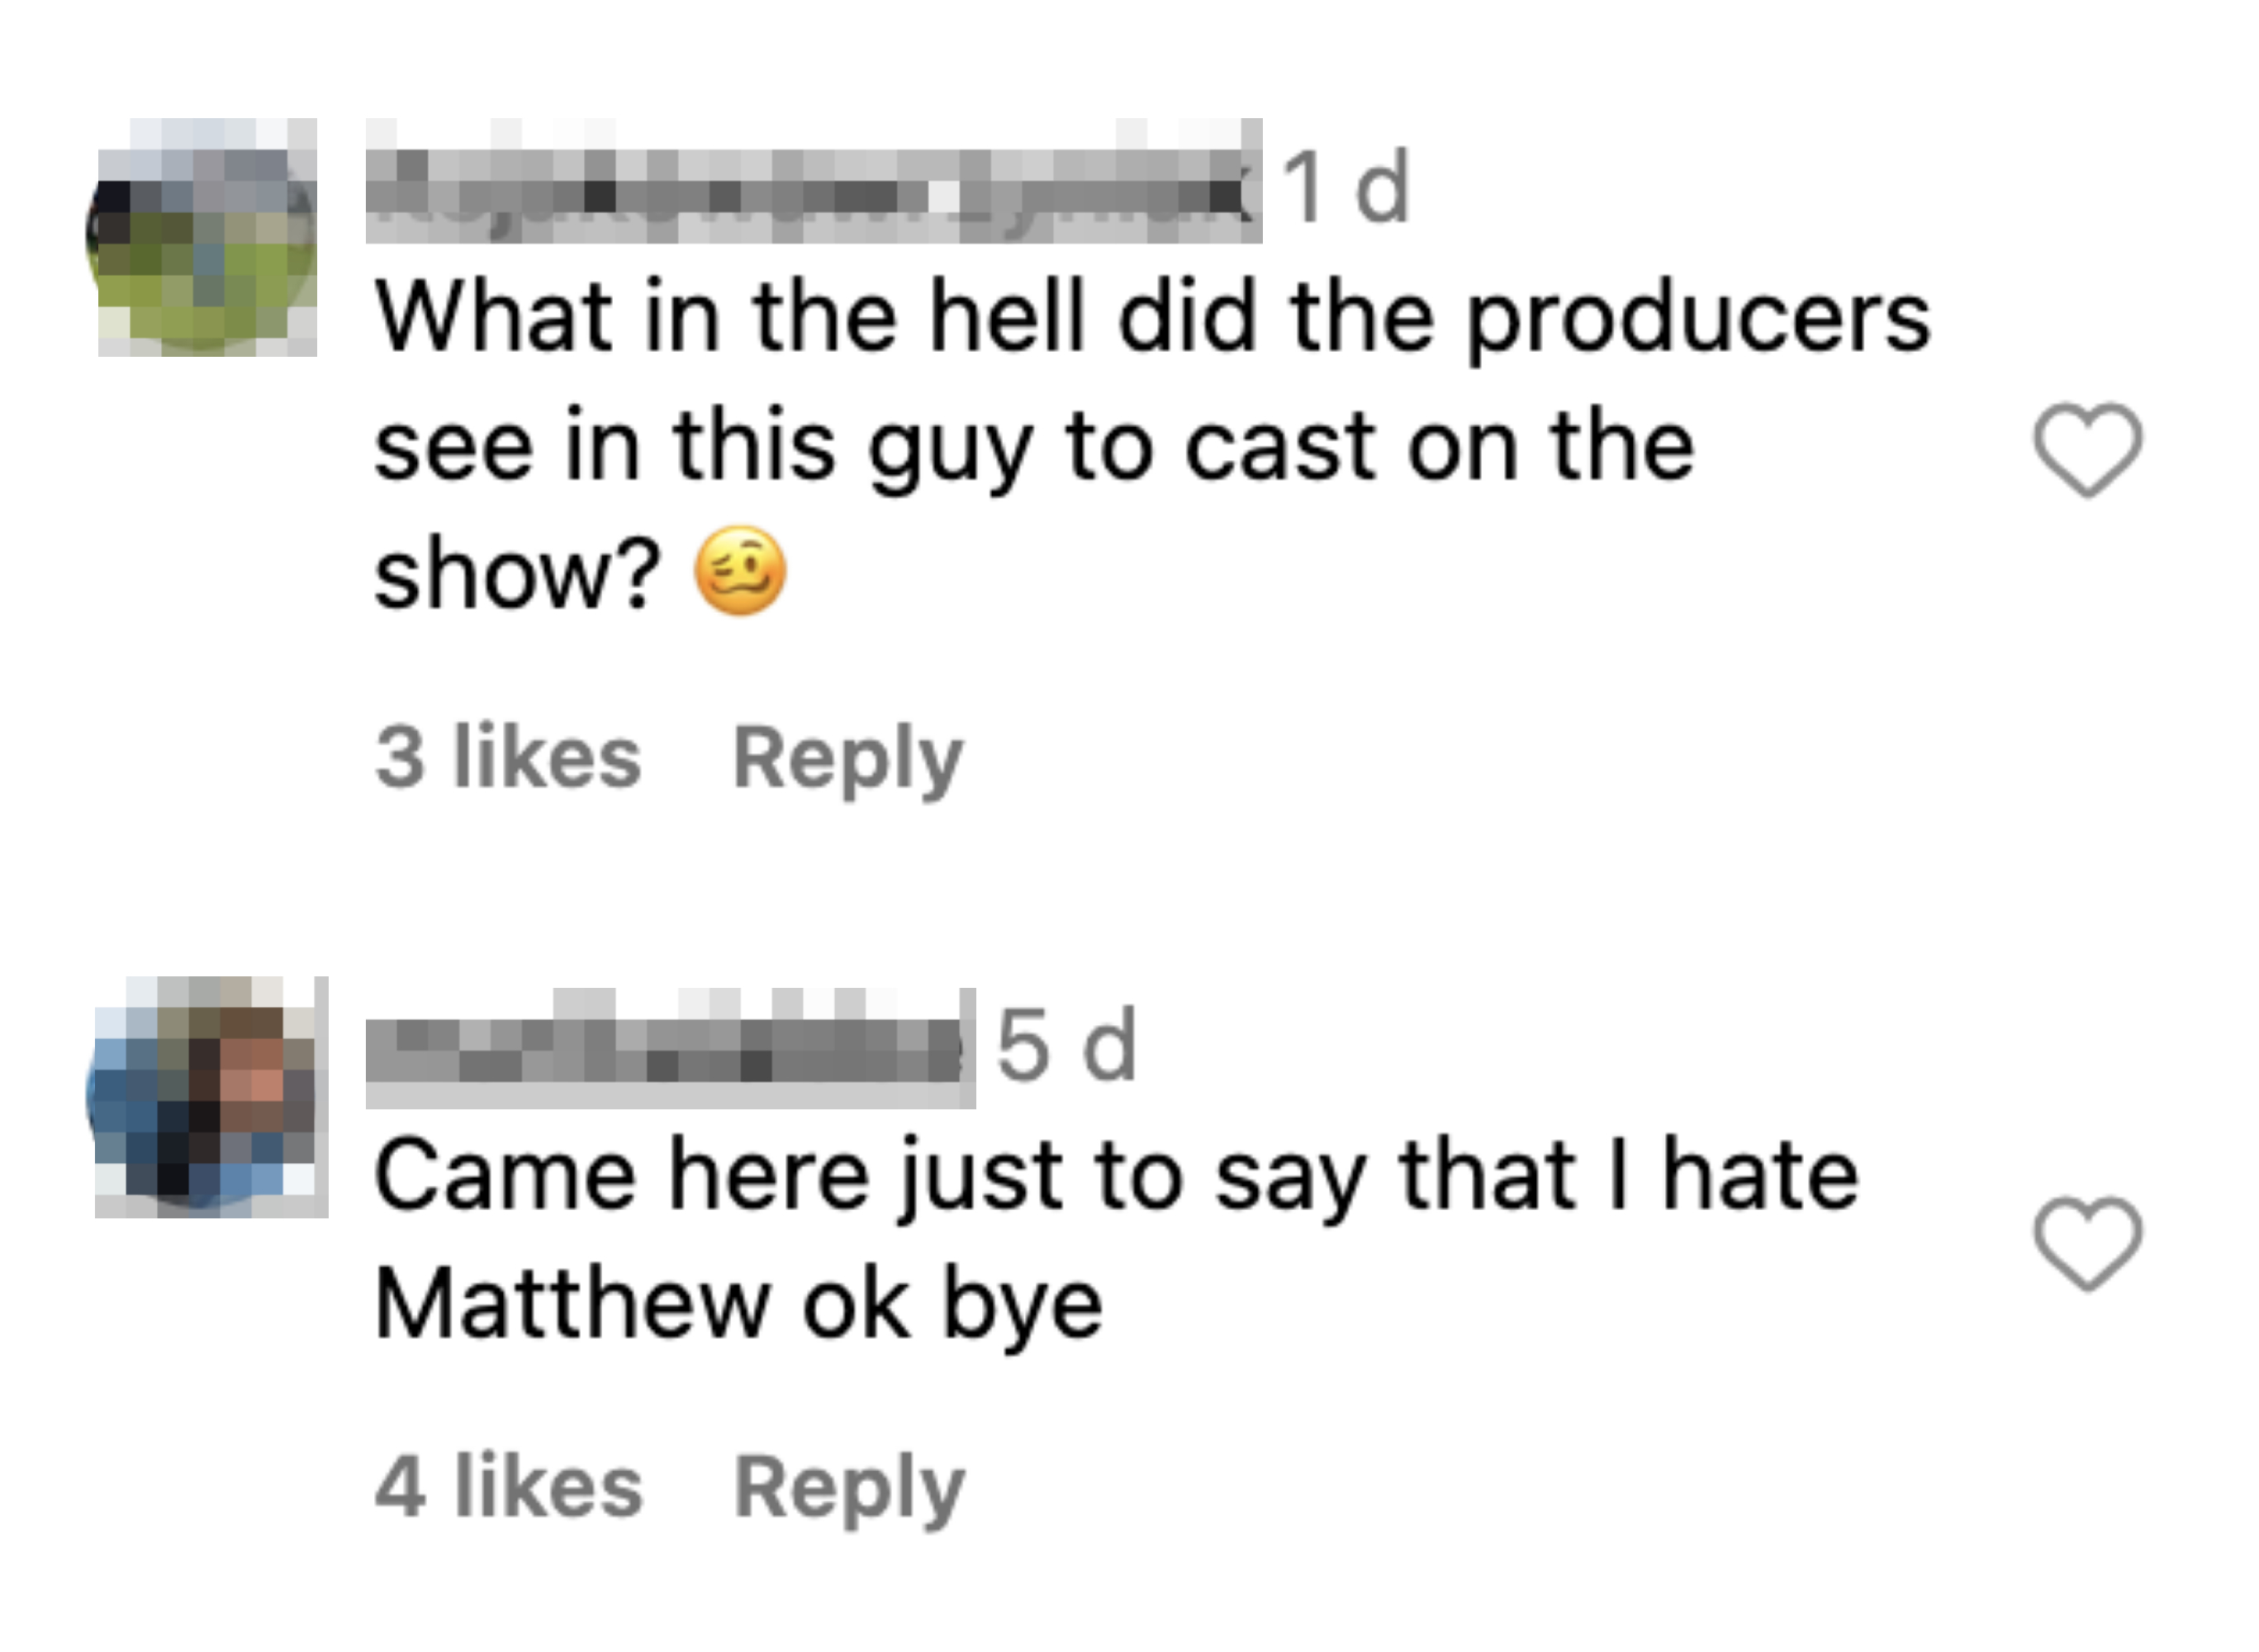 comments say, what in the hell did the producers see in this guy to cast him, and, came here just to say that i hate Matthew ok bye